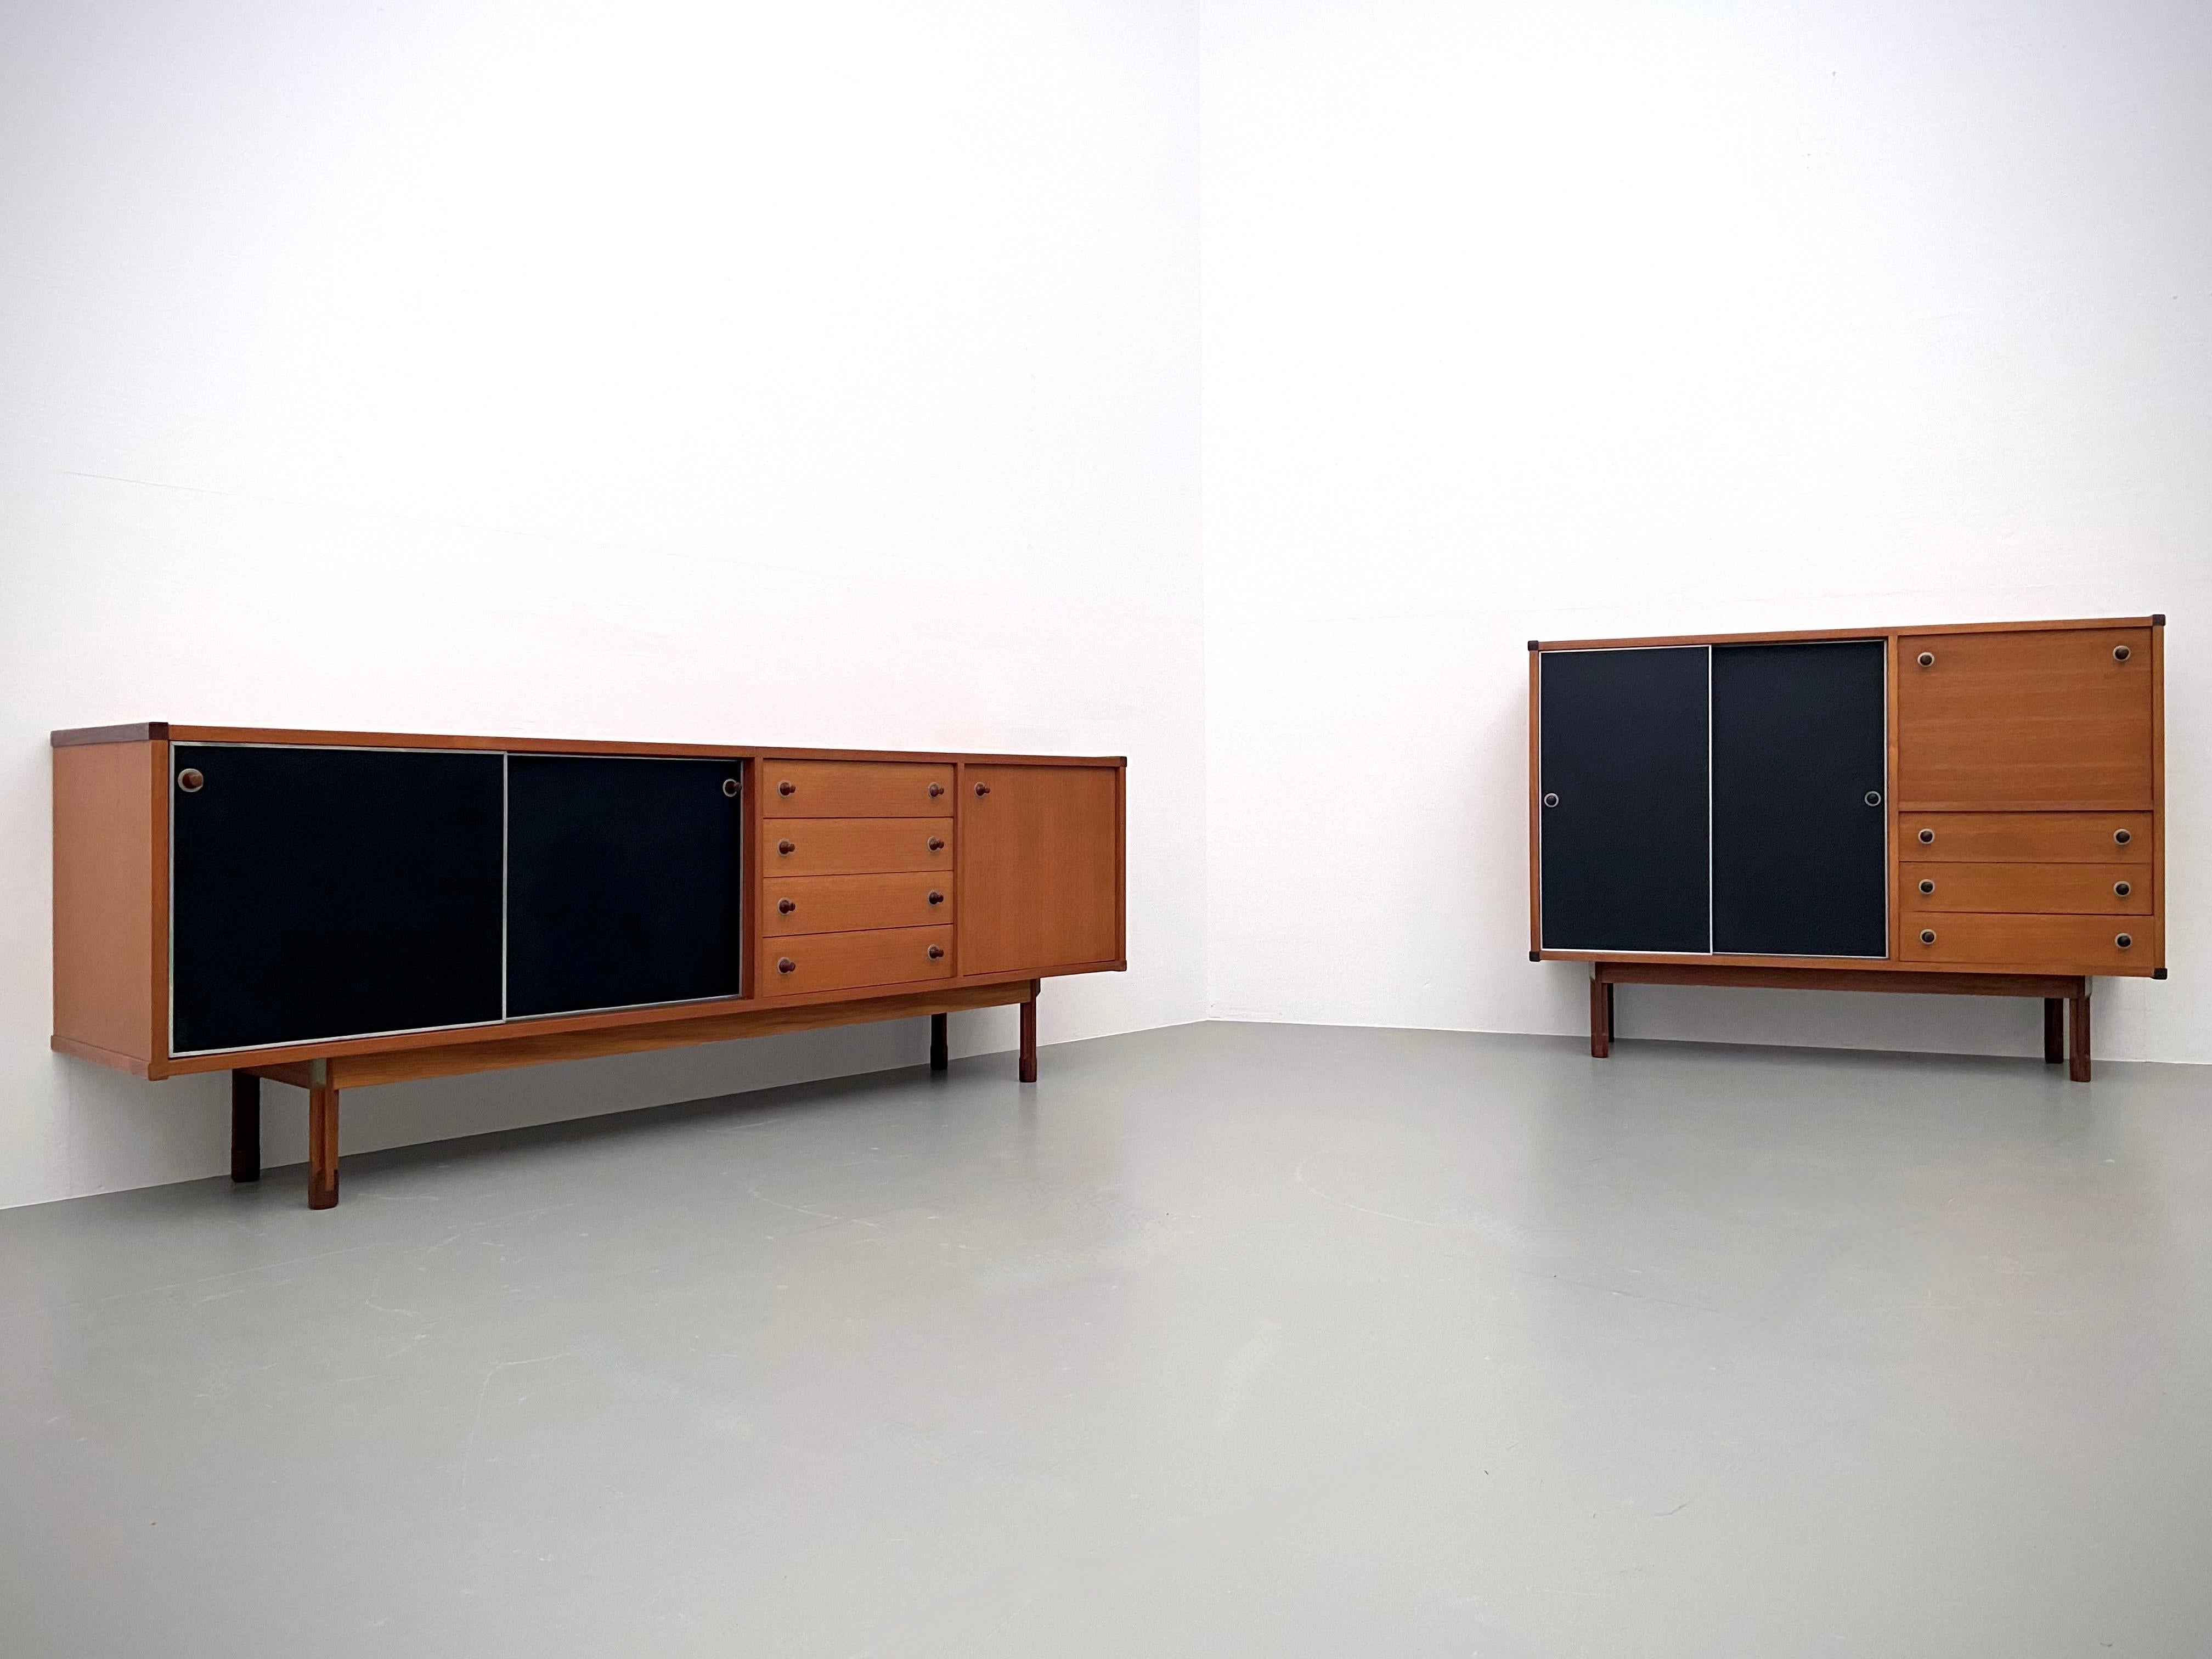 High Credenza by Pierro Ranzani for Elam in Laminate, Teak and Metal, 1962 For Sale 7